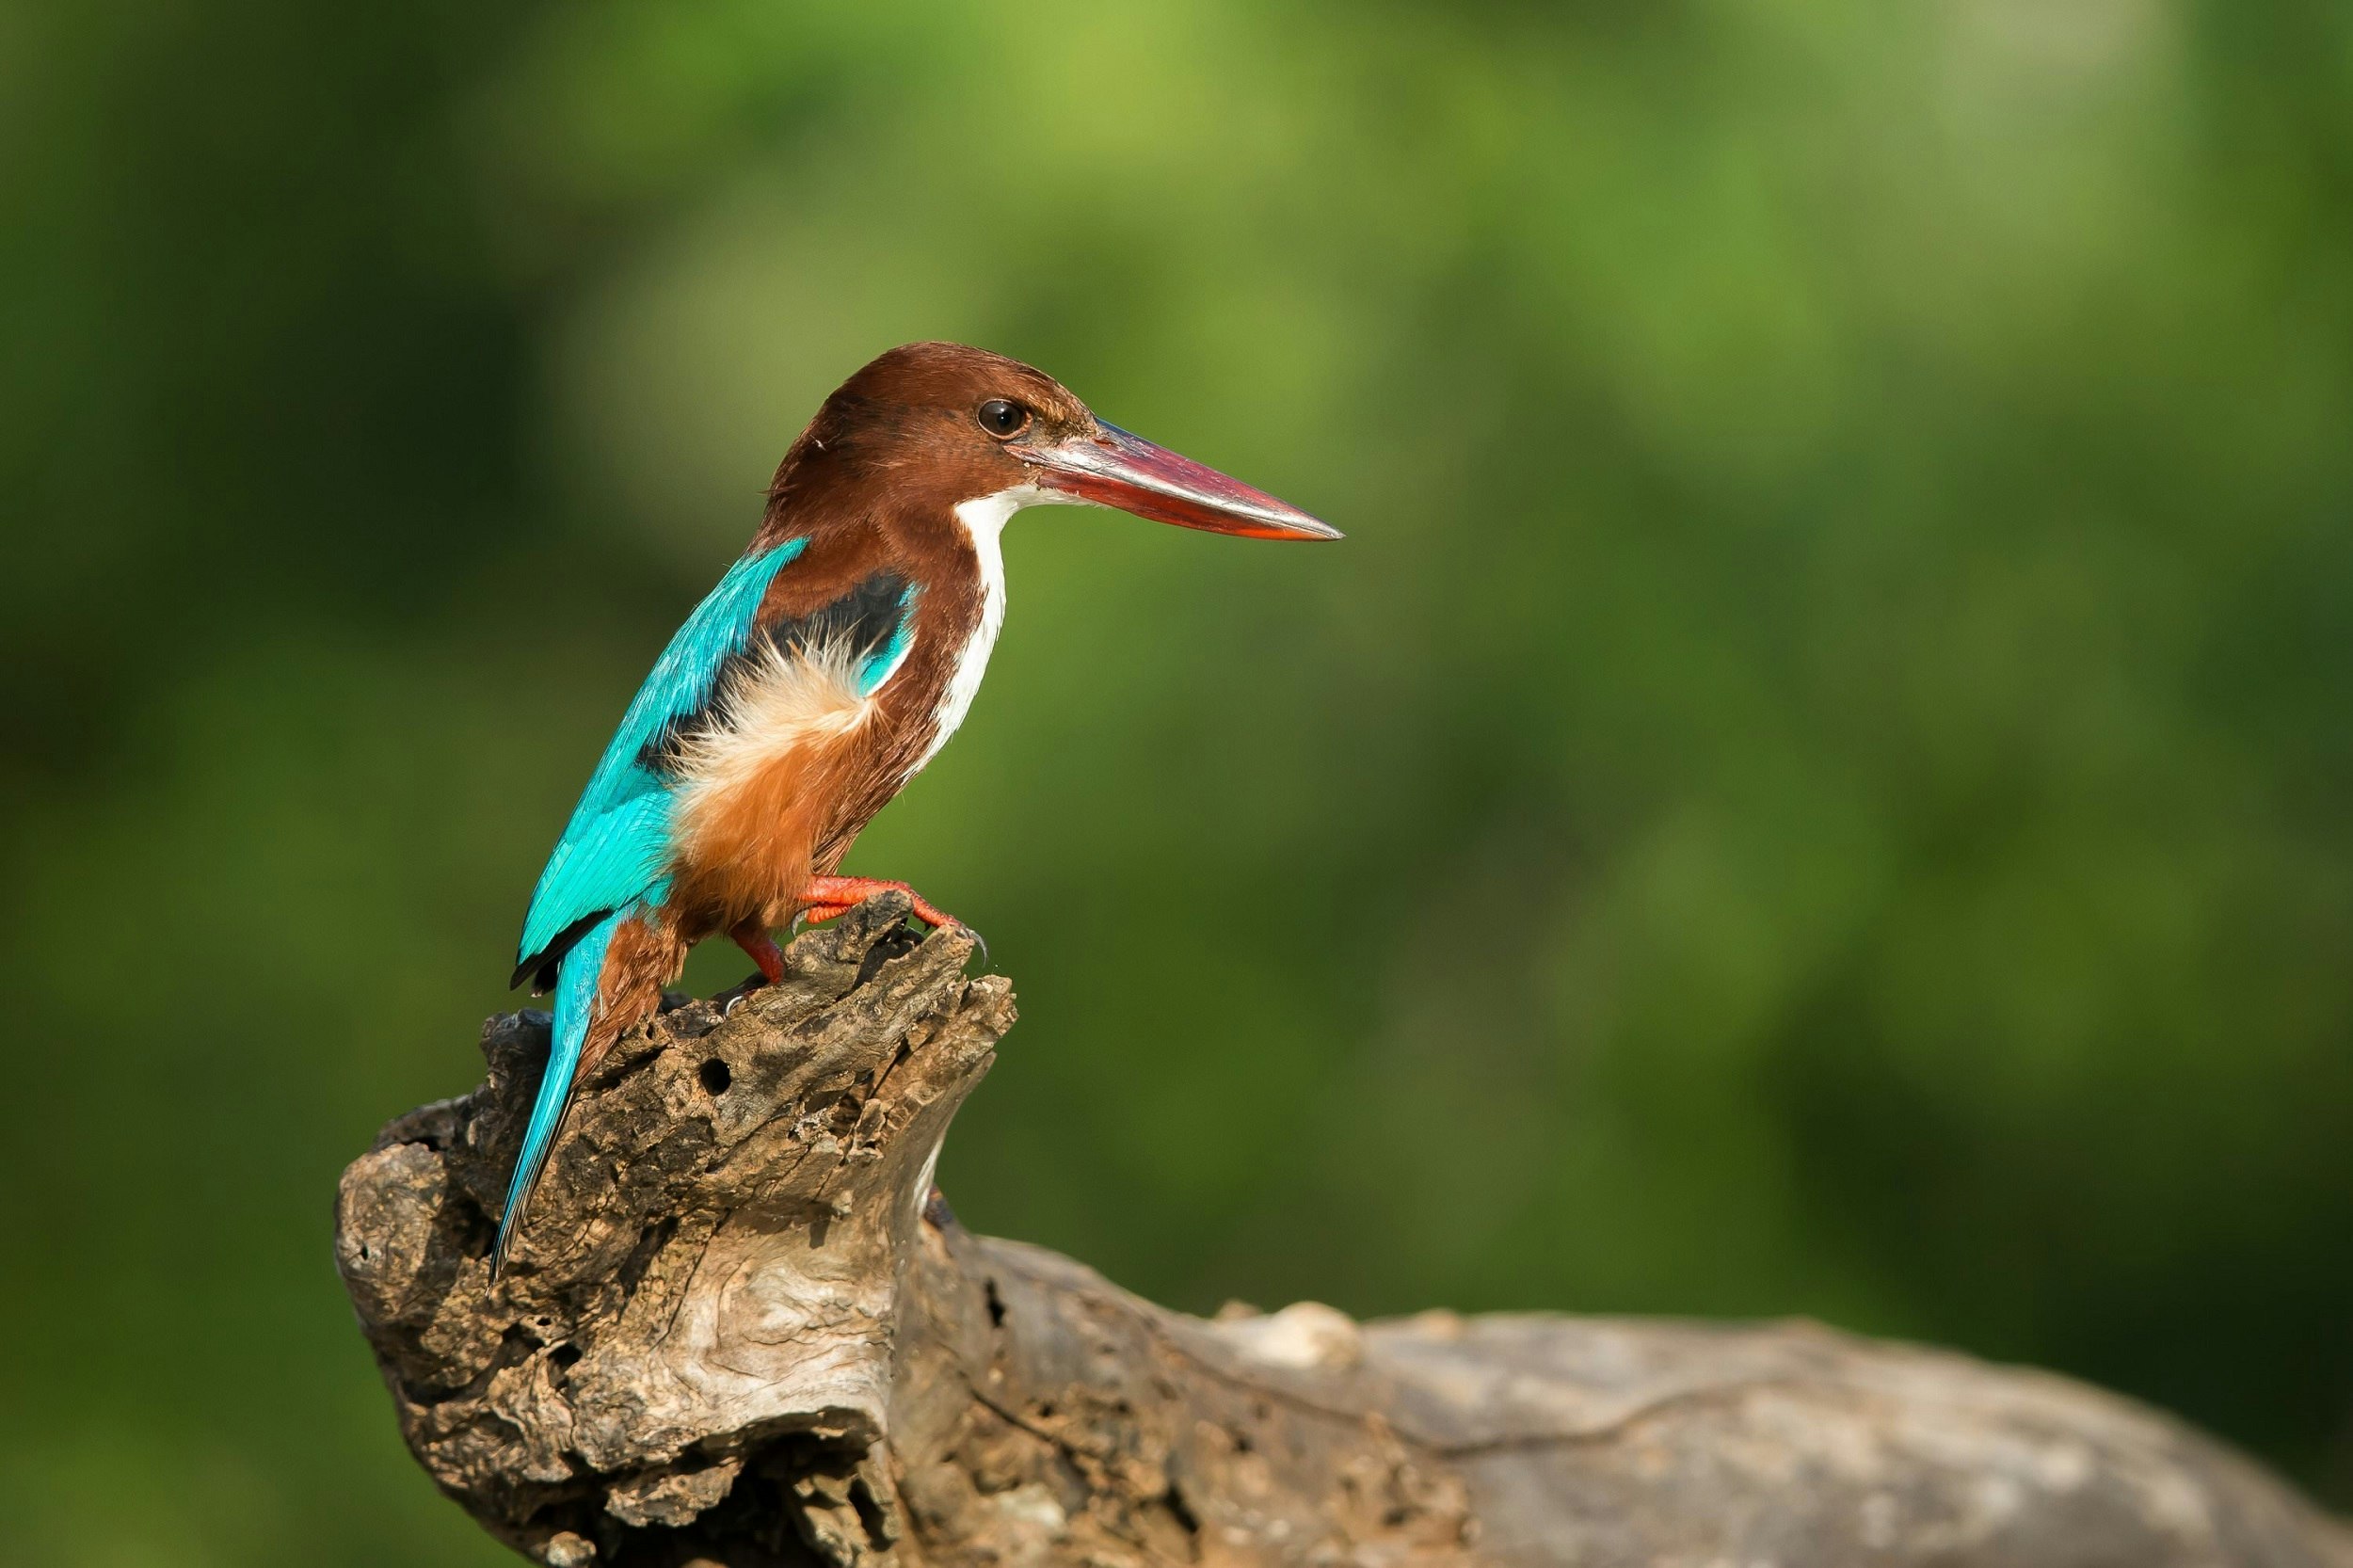 A white-throated kingfisher (aka white-breasted kingfisher) sitting on a branch; it has a bright blue back, wings and tail. But its head, shoulders, flanks and lower belly are chestnut in colour, and the throat and breast are bright white. The large bill and legs are red.